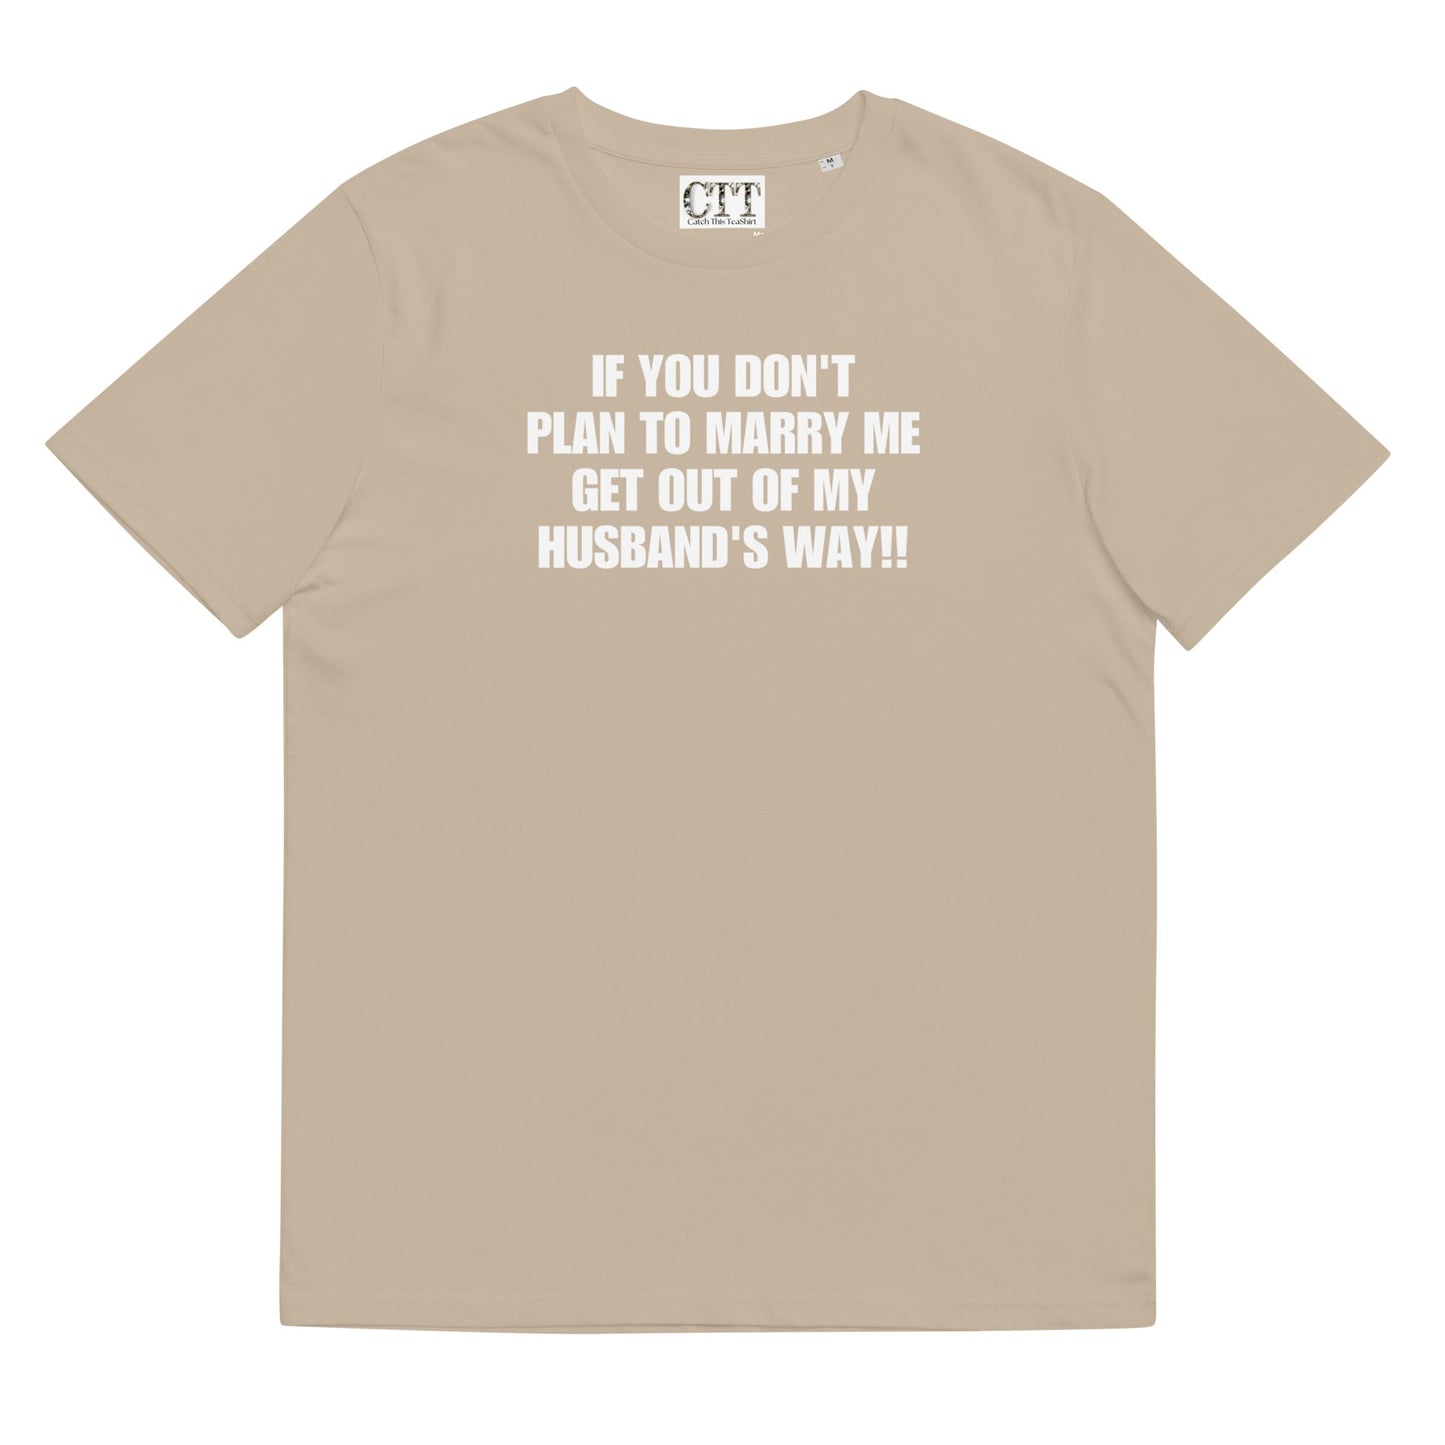 If You Don't Plan To Marry Me.. Get Out Of My Husband's Way | Organic Cotton T-shirt - Catch This Tea Shirts